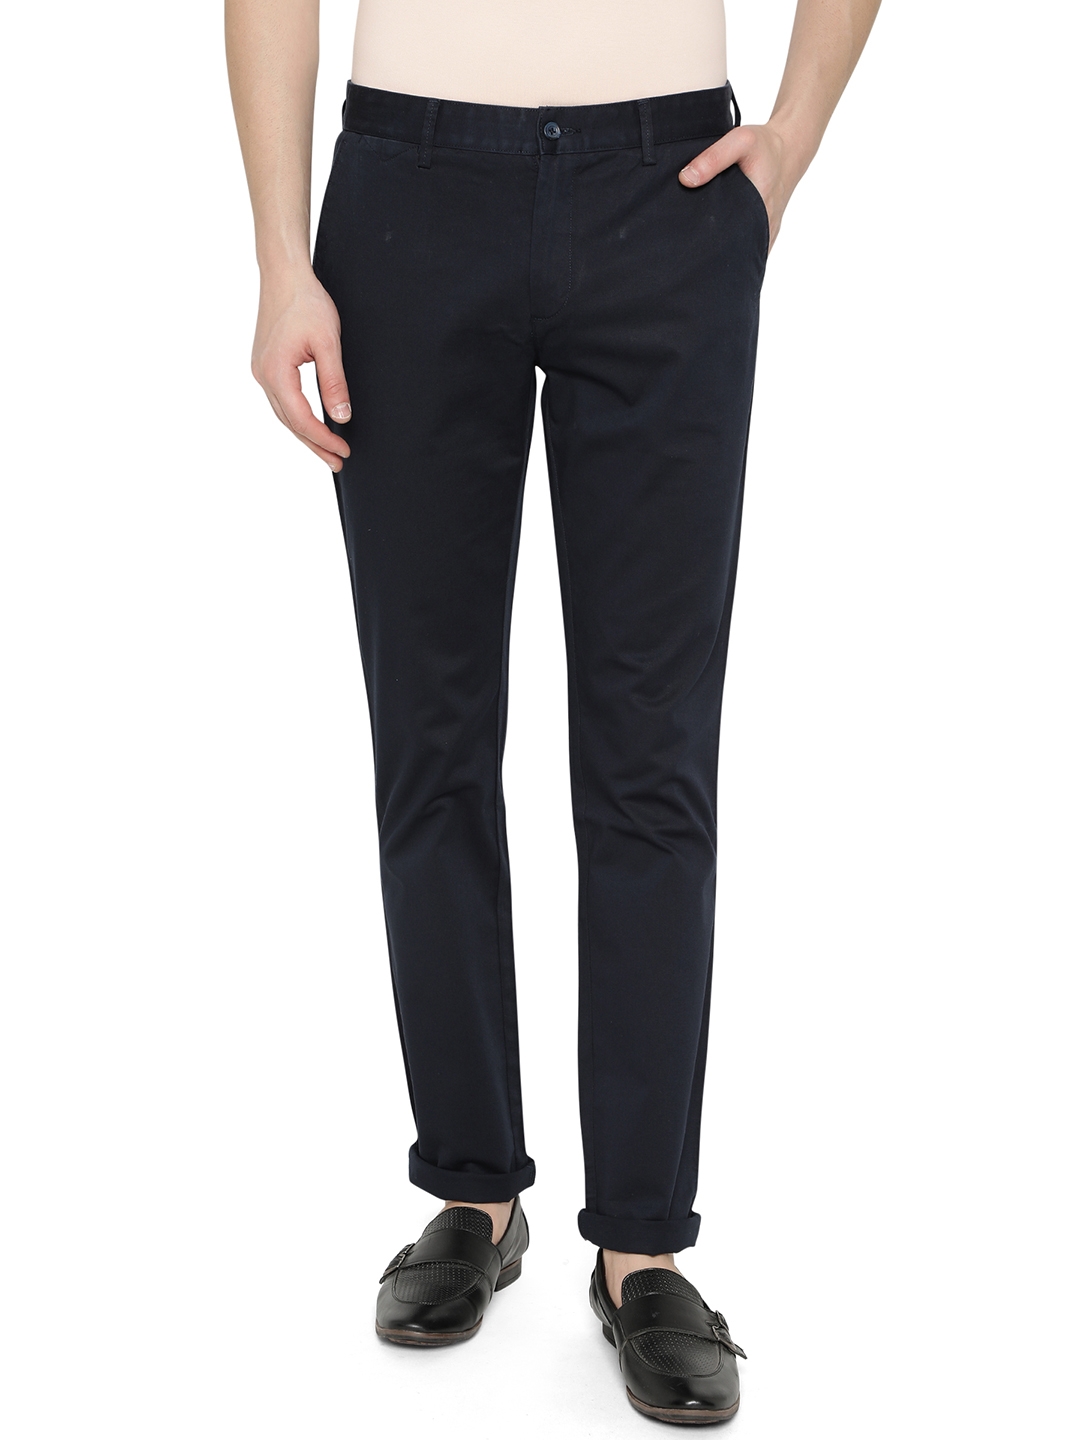 Greenfibre | Navy Blue Solid Super Slim Fit Casual Trouser | Greenfibre